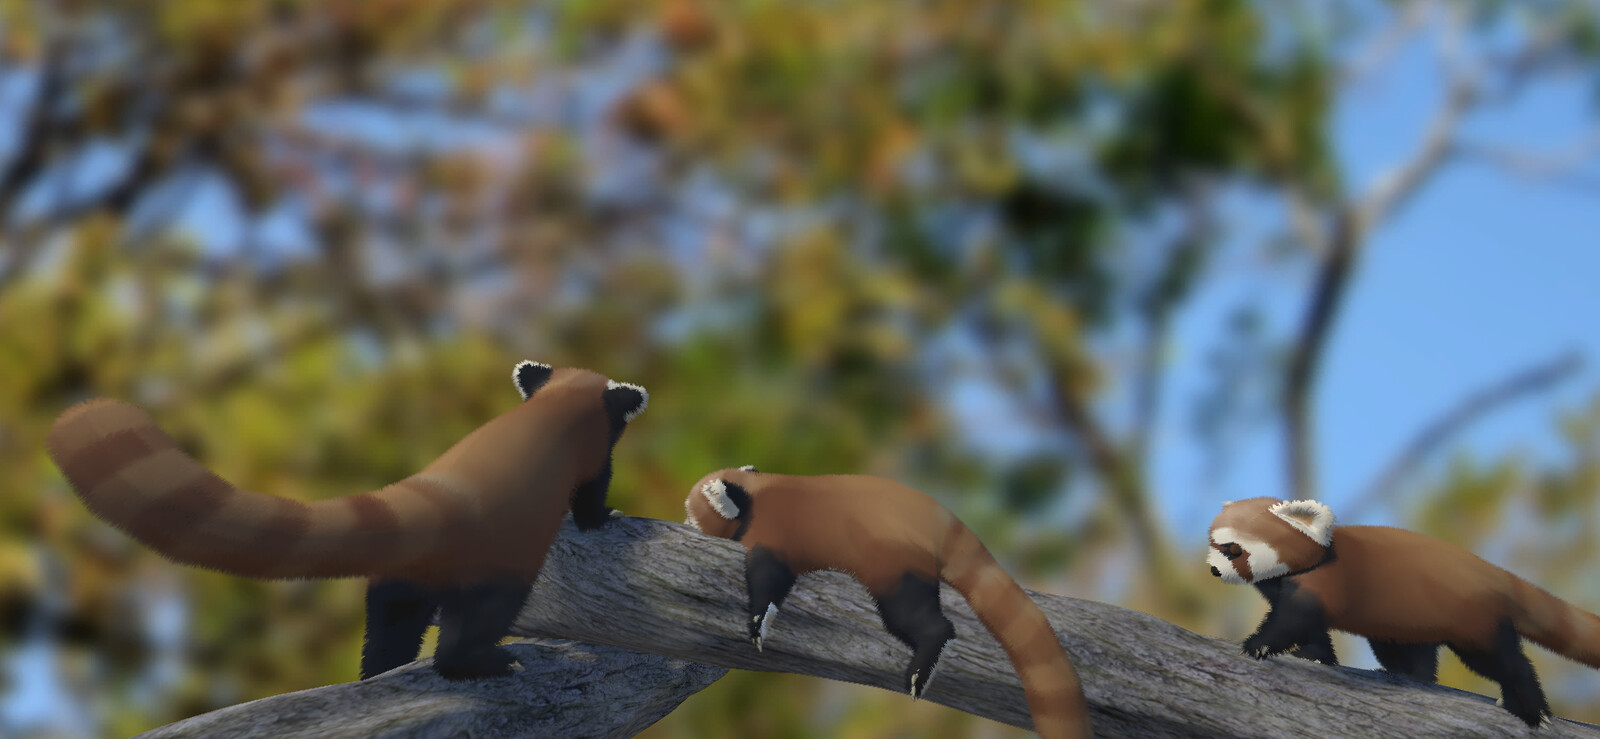 Red pandas in Unity #2